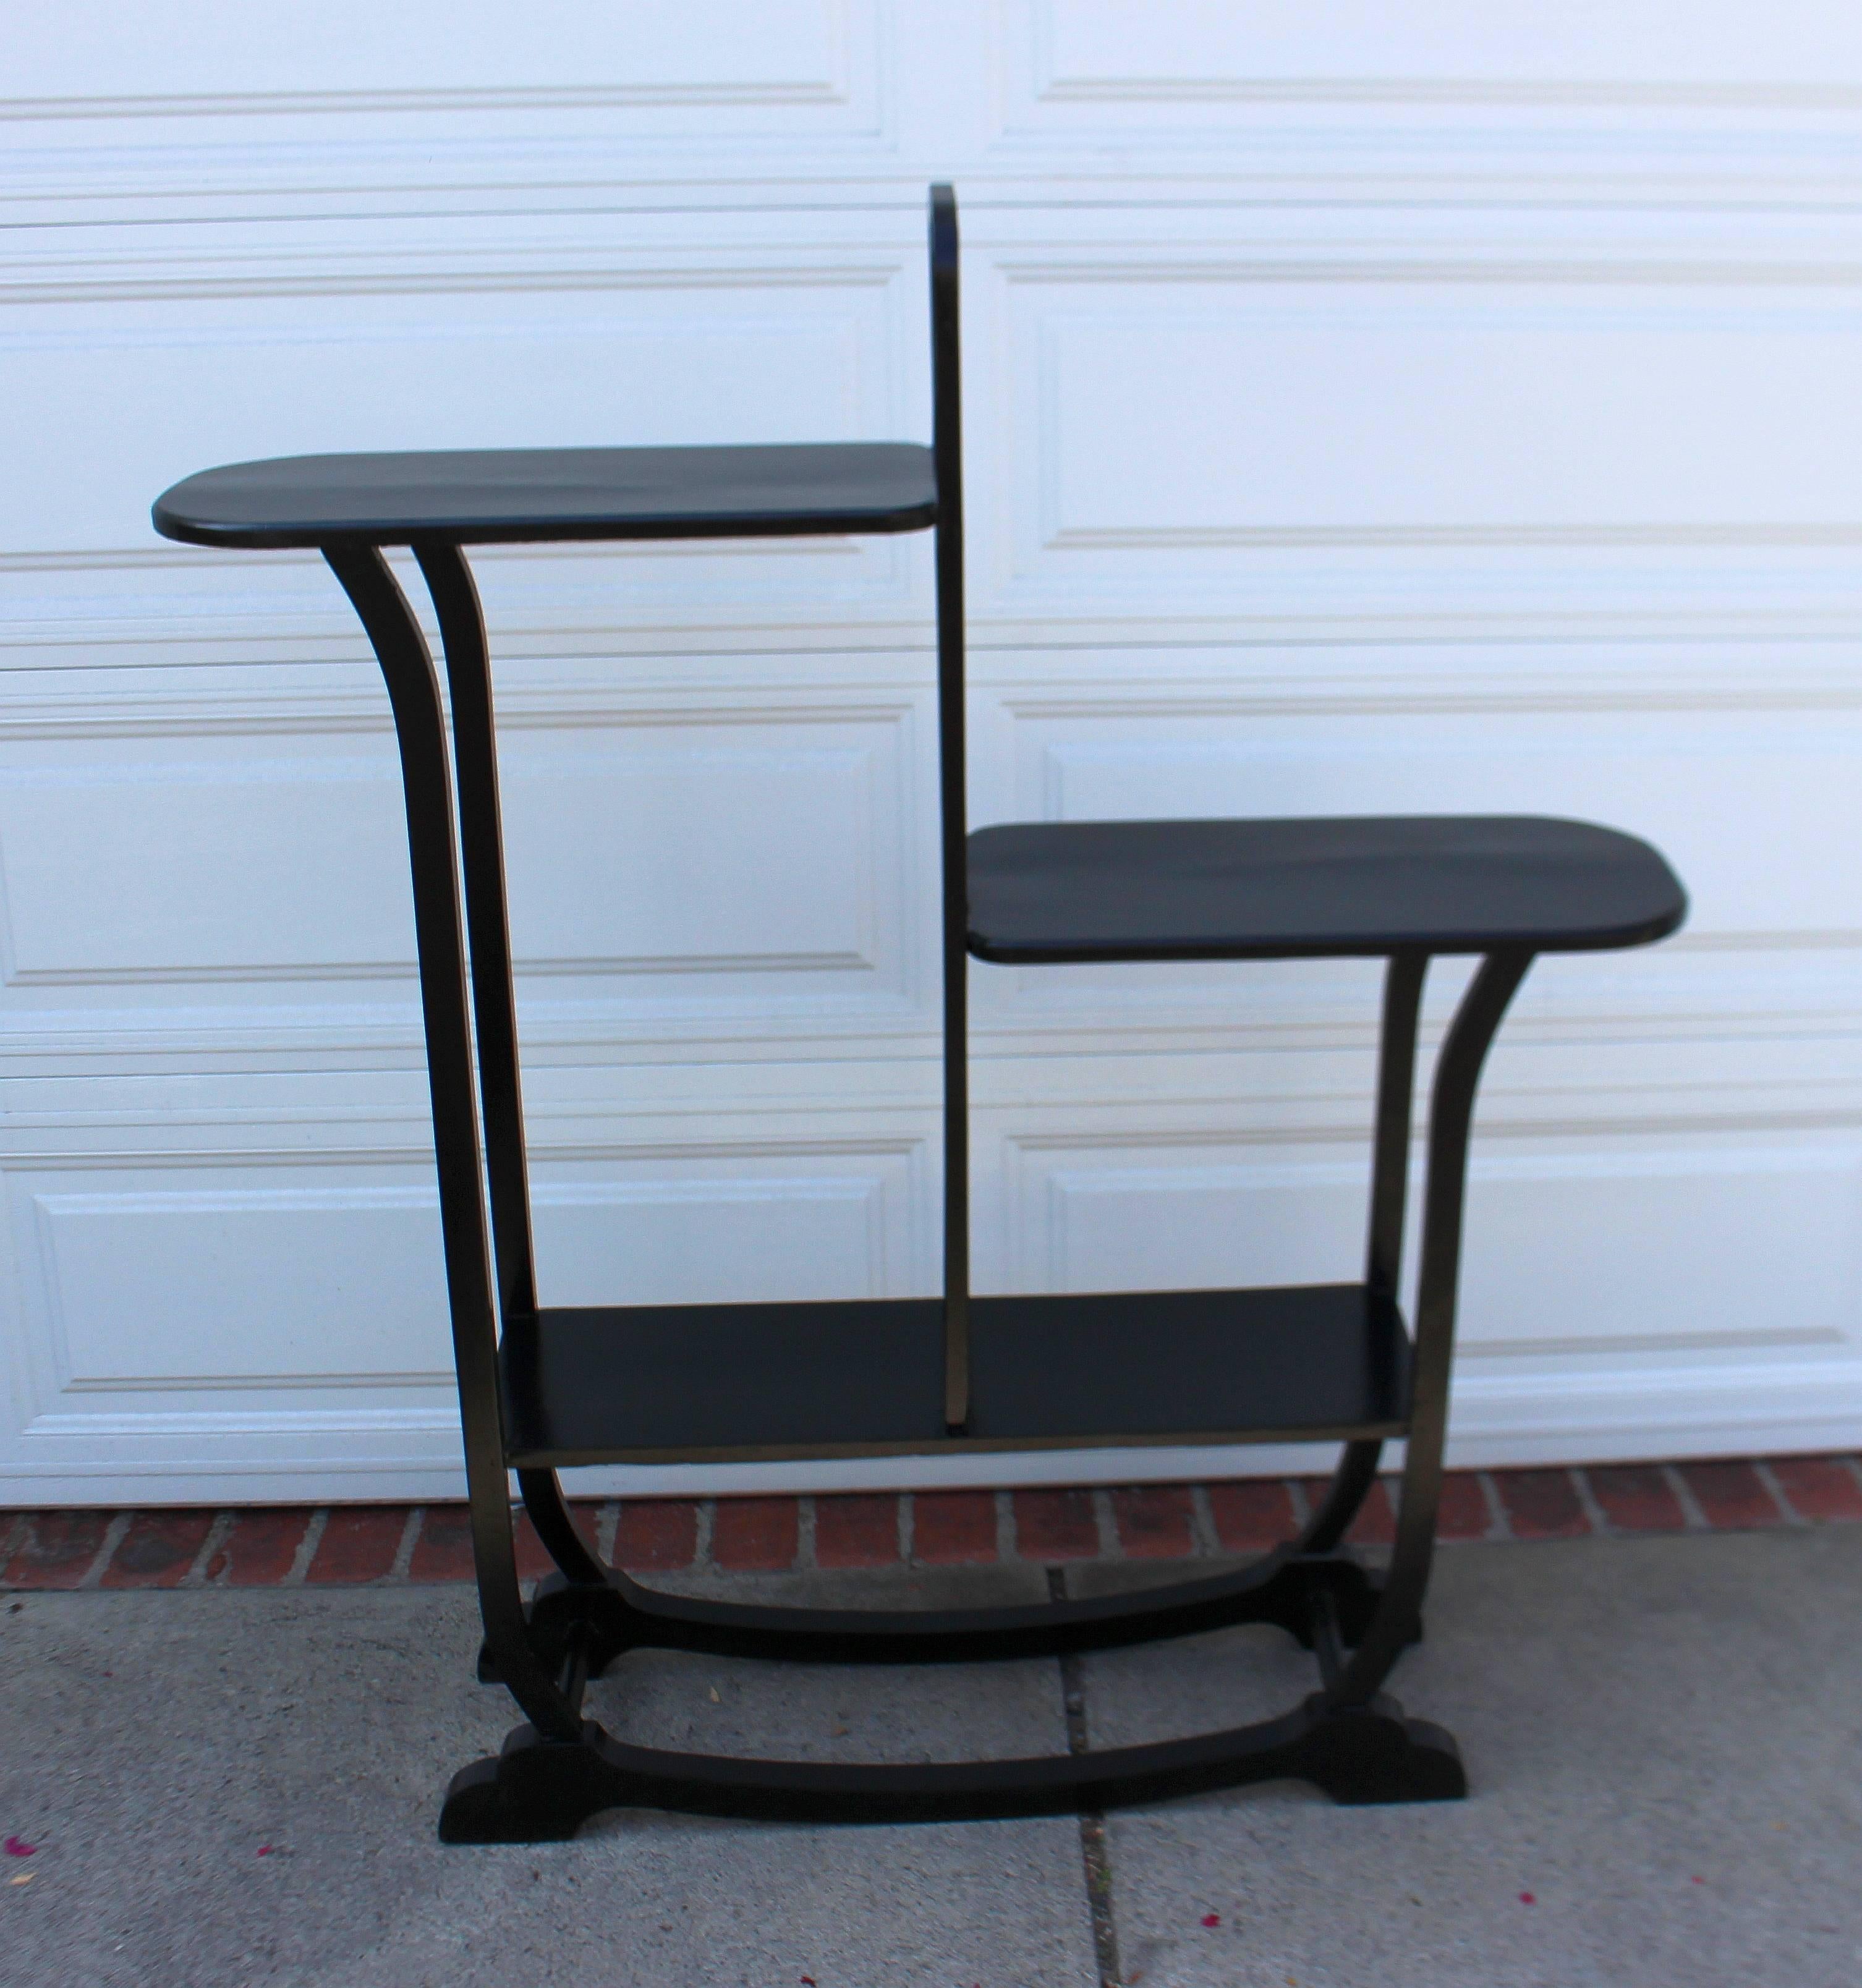 Black ebonized bookshelf, circa 1930s.
Continental US In-Home Delivery  - 3 Weeks $ 400